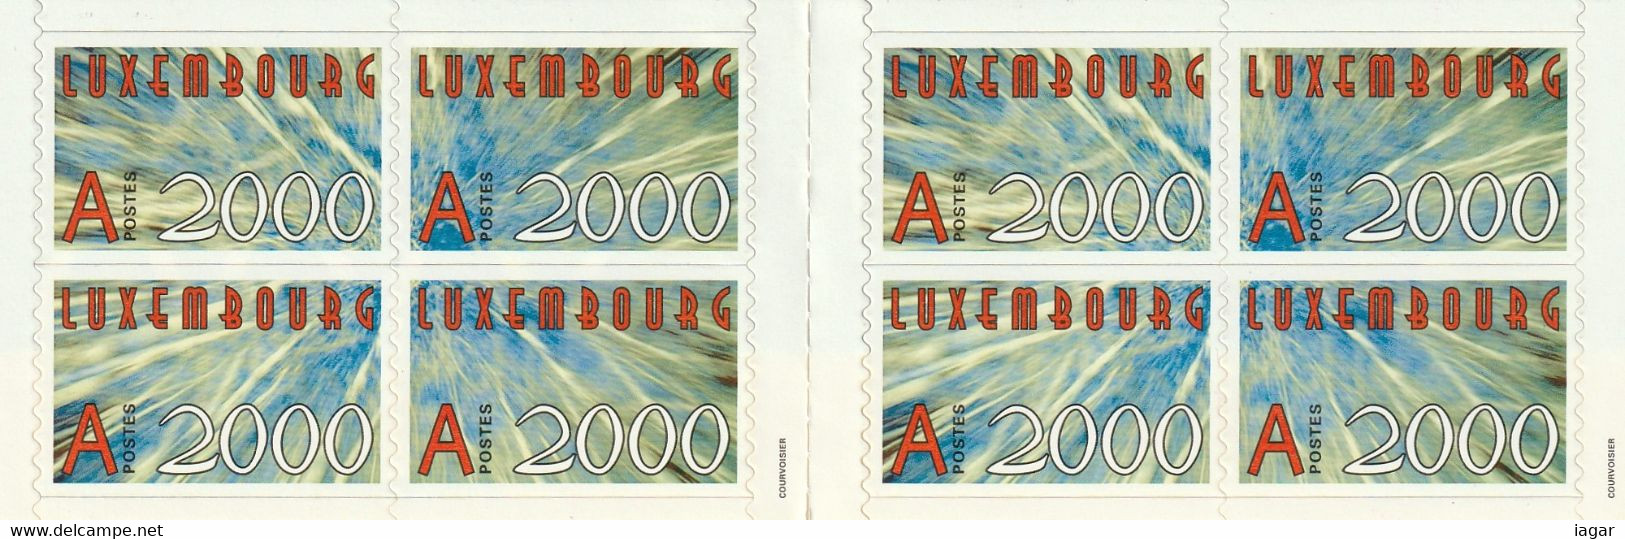 LUXEMBOURG 2000 - BOOKLET 2000 AND LETTER 'A' - Libretti